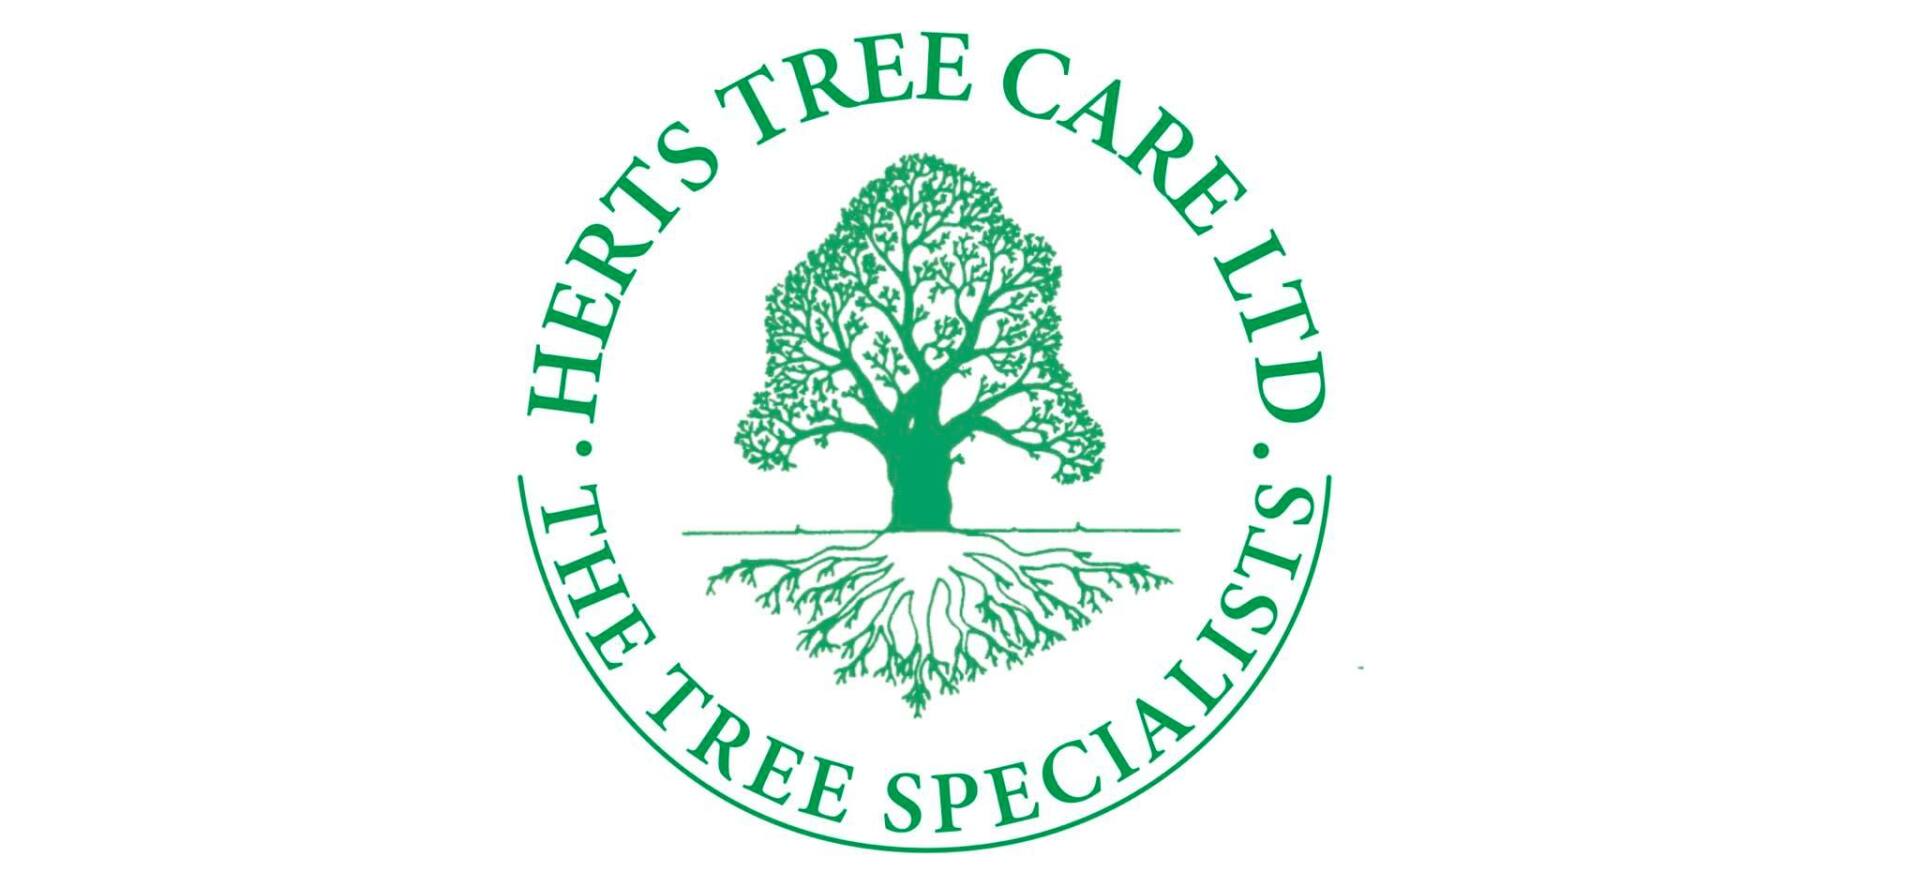 Herts Tree Care - The Tree Specialists Logo